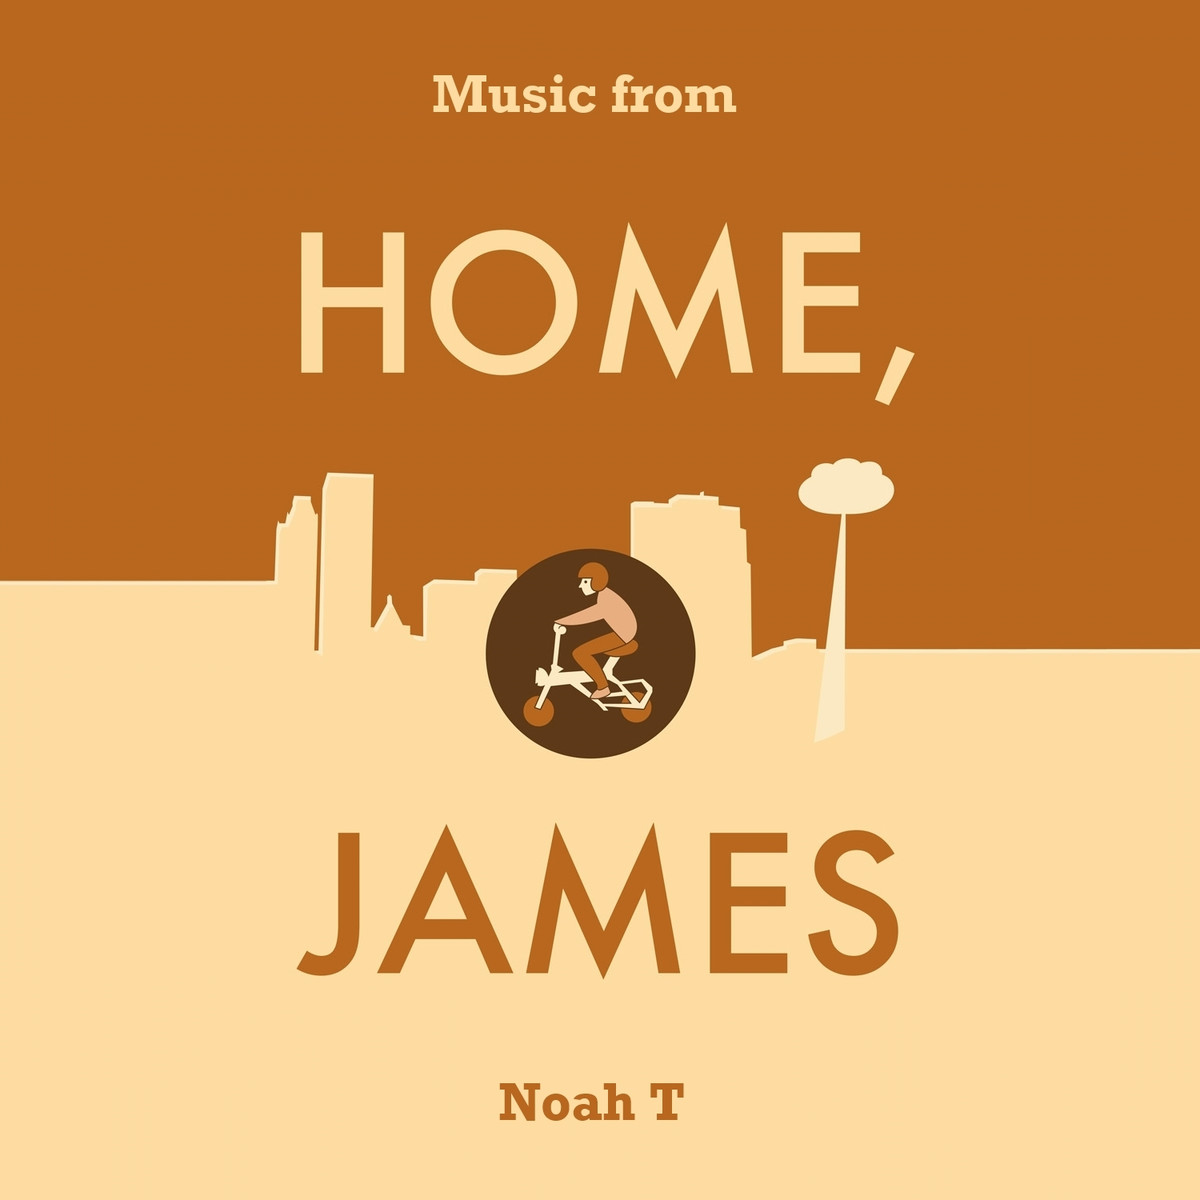 Noah James. Towards the Sun (from the "Home" Soundtrack). Home soundtrack